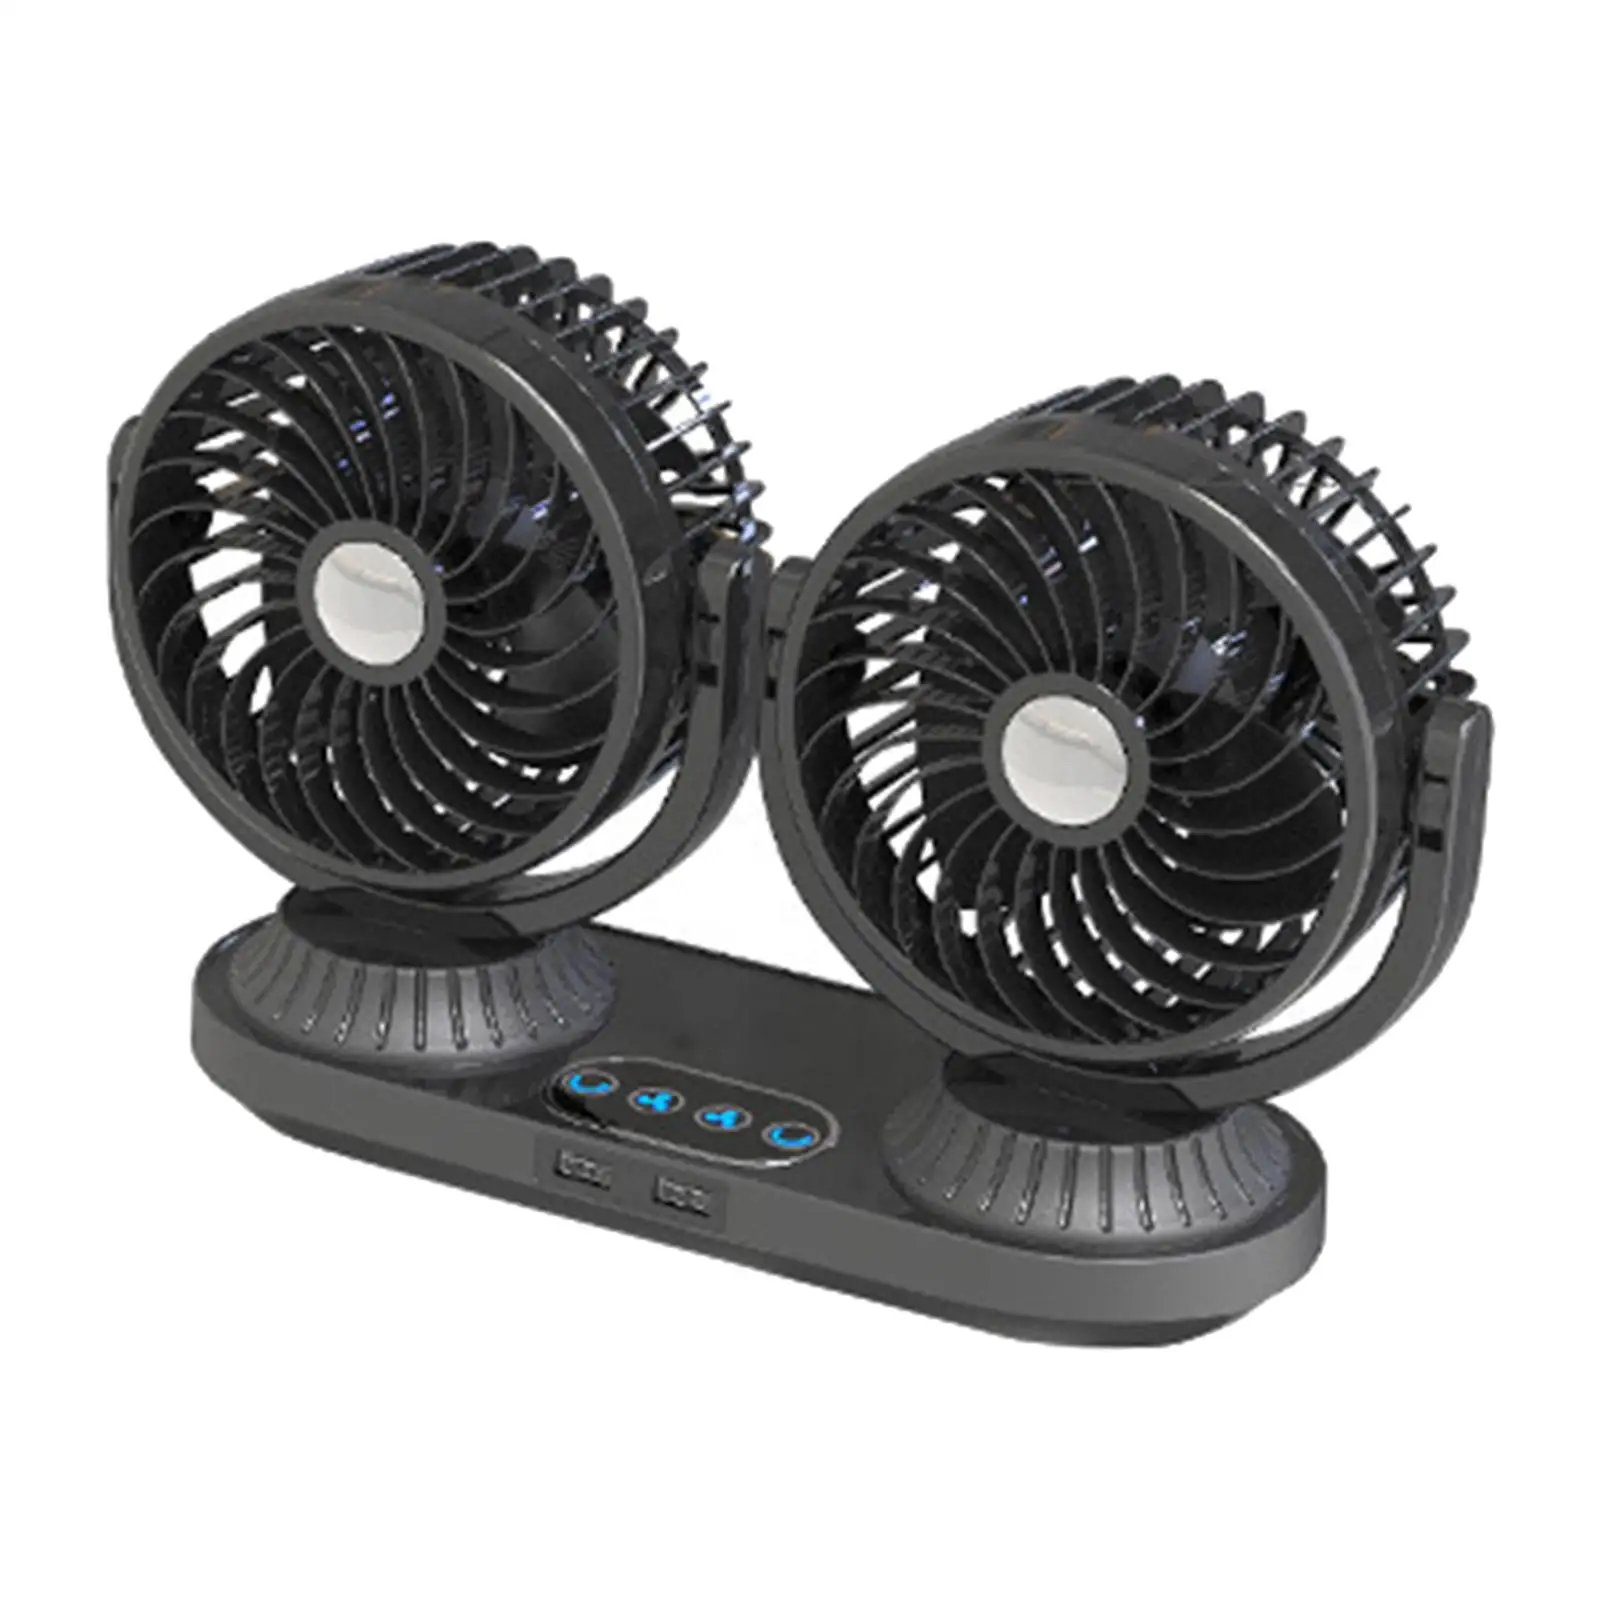 Dual Heads Car Fan for 12V 24V Vehicles 3 Speeds Adjustable Electric 180 up and Down Adjustment 360 Rotatable Auto Cooling Fan